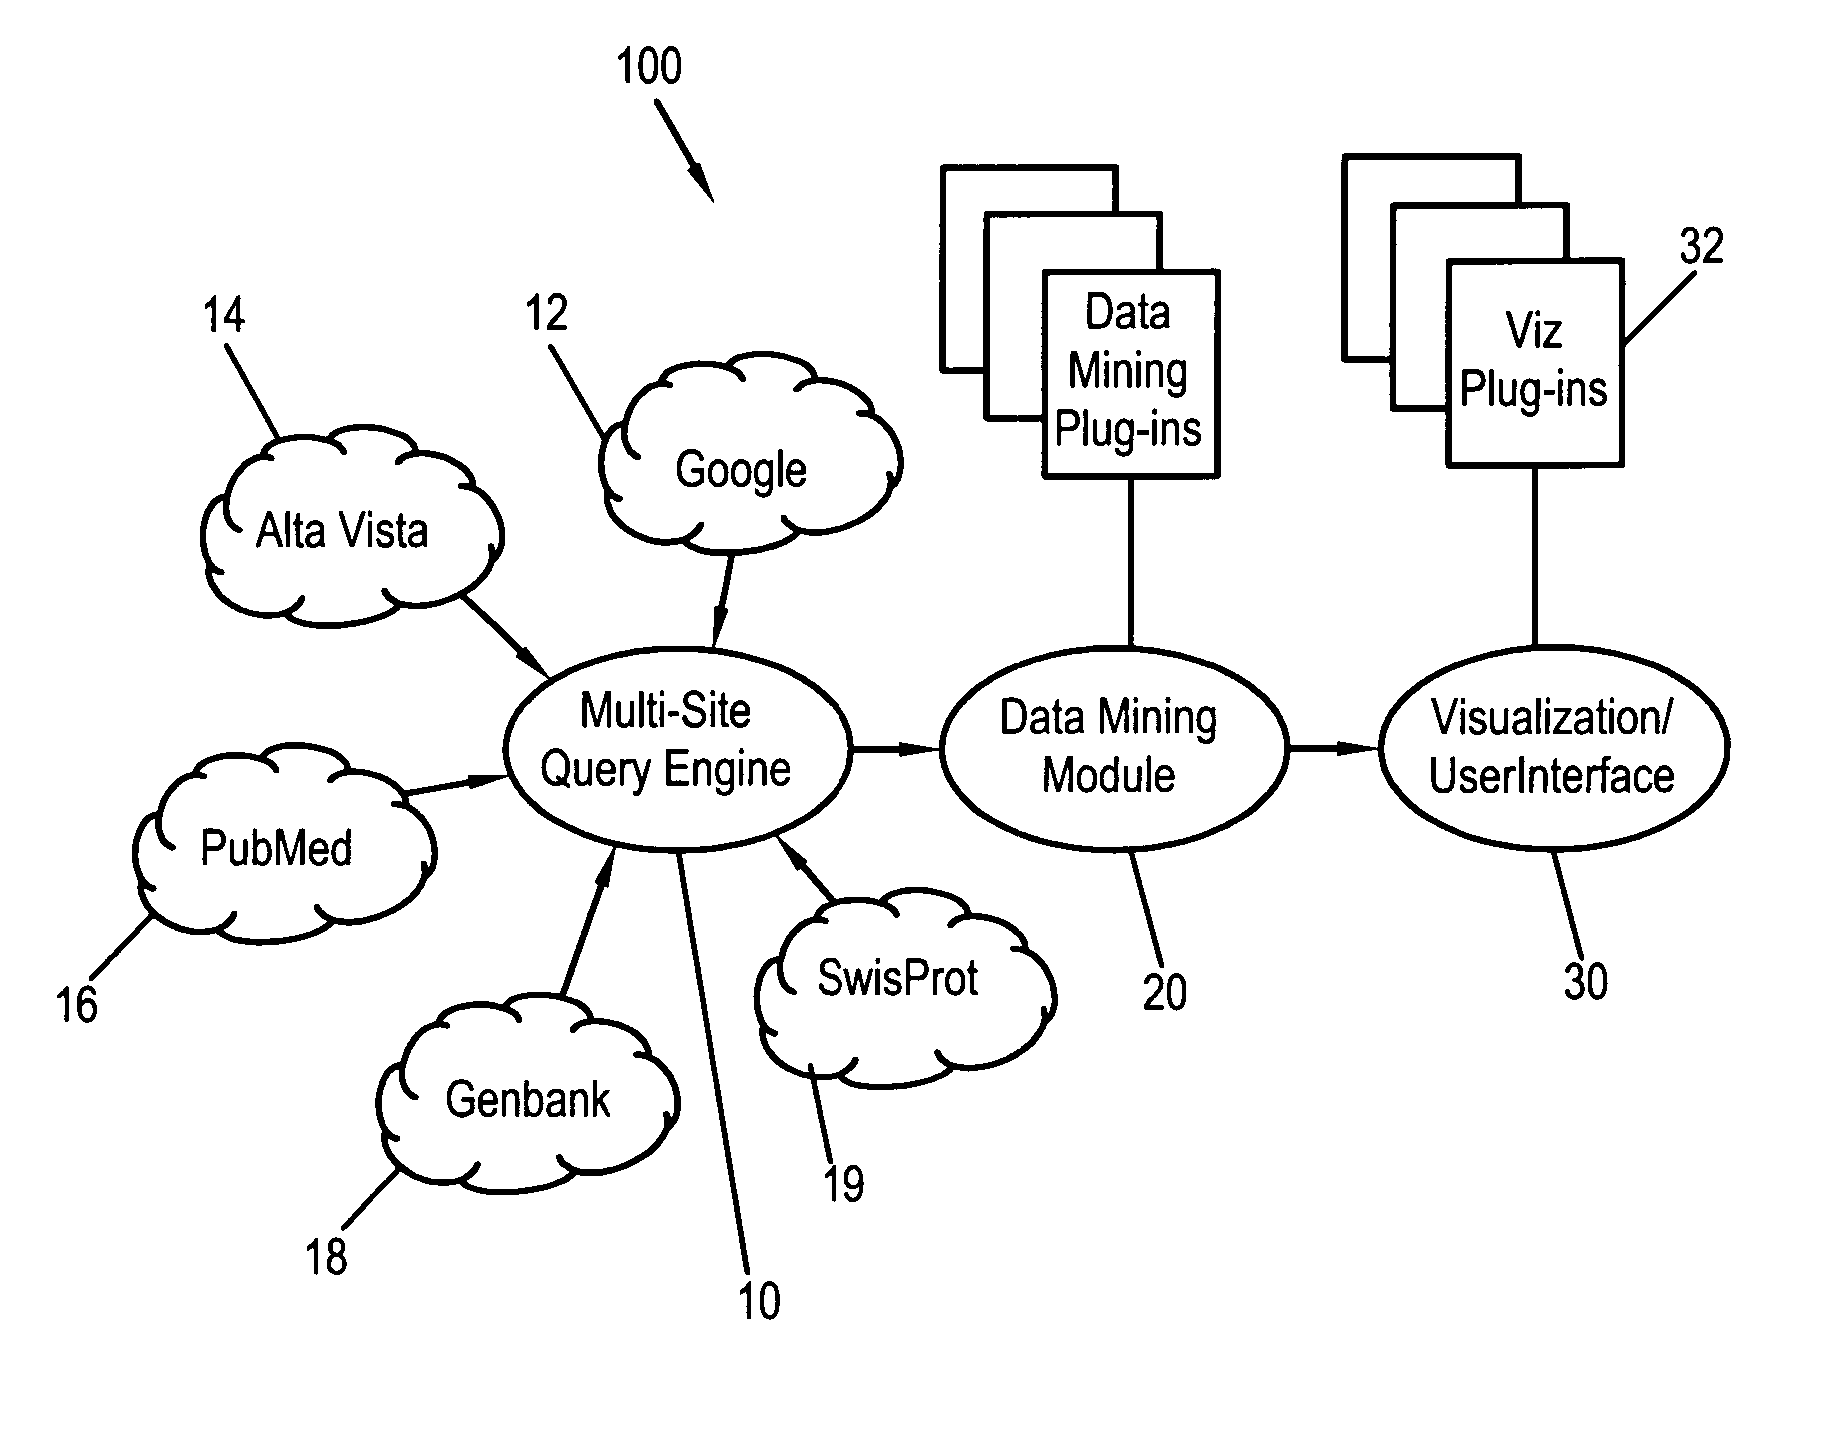 Systems, methods and computer readable media for performing a domain-specific metasearch, and visualizing search results therefrom